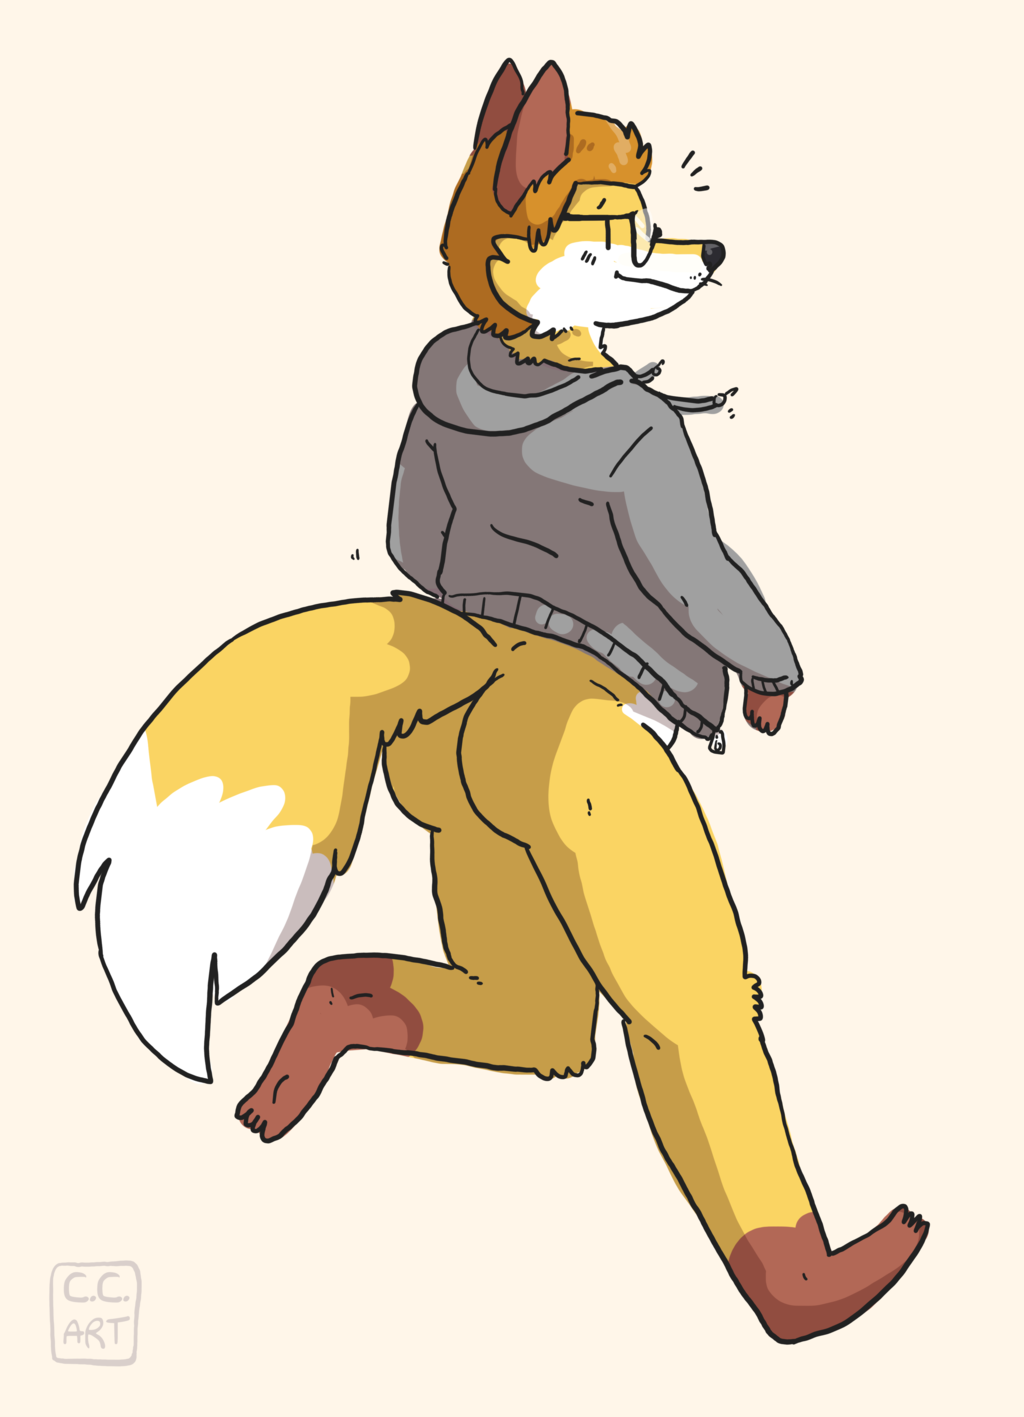 Booty [commission]